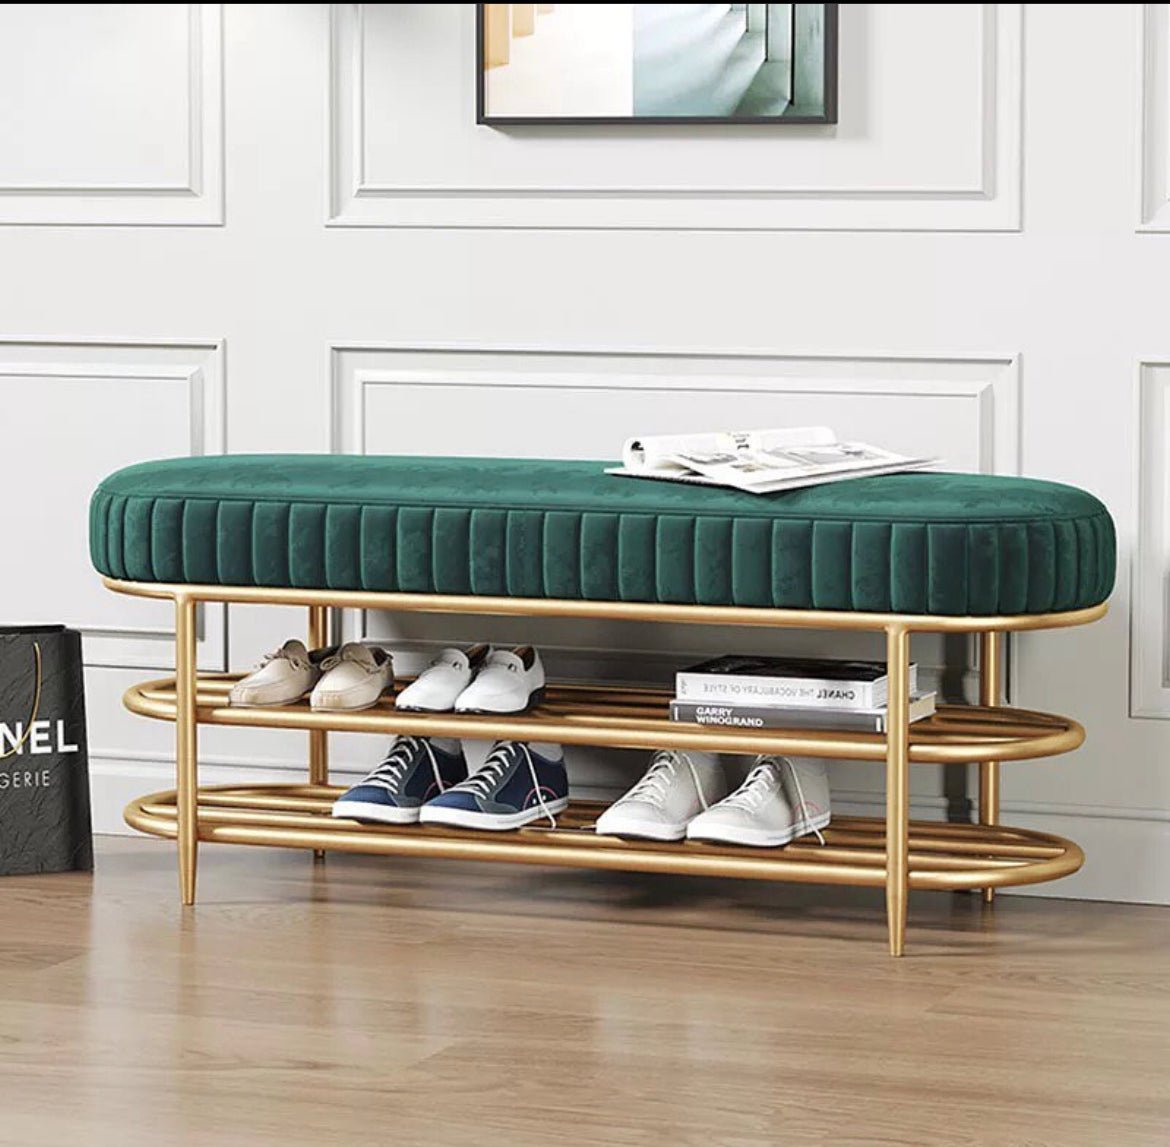 Bench Footstool with shoes shelves - SHAGHAF HOME